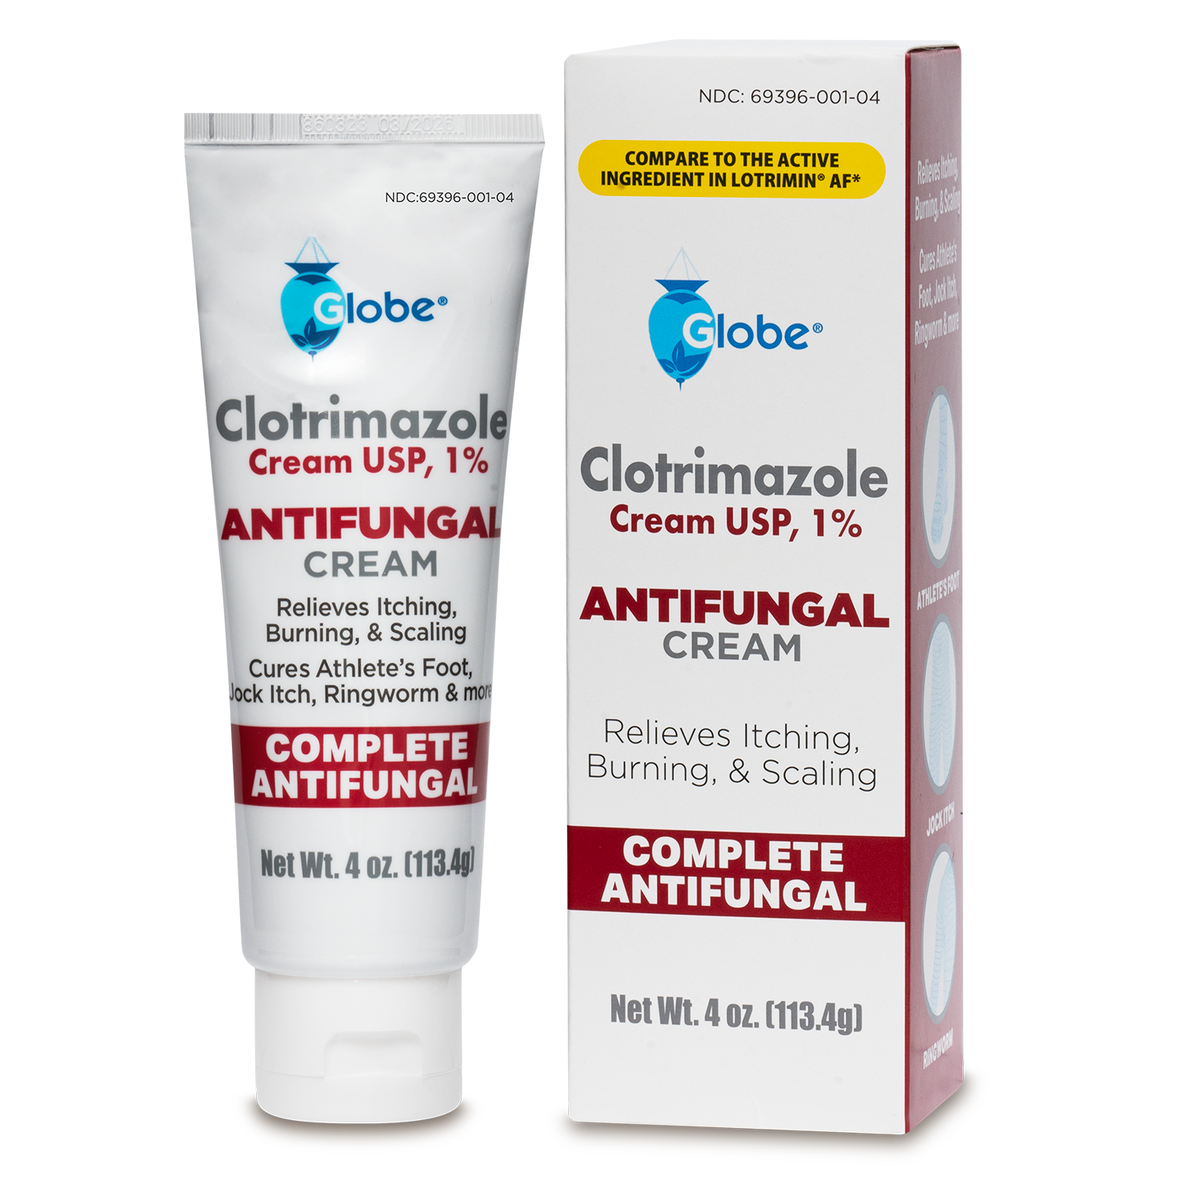 Globe Clotrimazole Antifungal Cream 1% (4 oz Tube) Relieves The itching, Burning, Cracking and Scaling associated with fungal infections, Compare to Lotrimin Active Ingredient